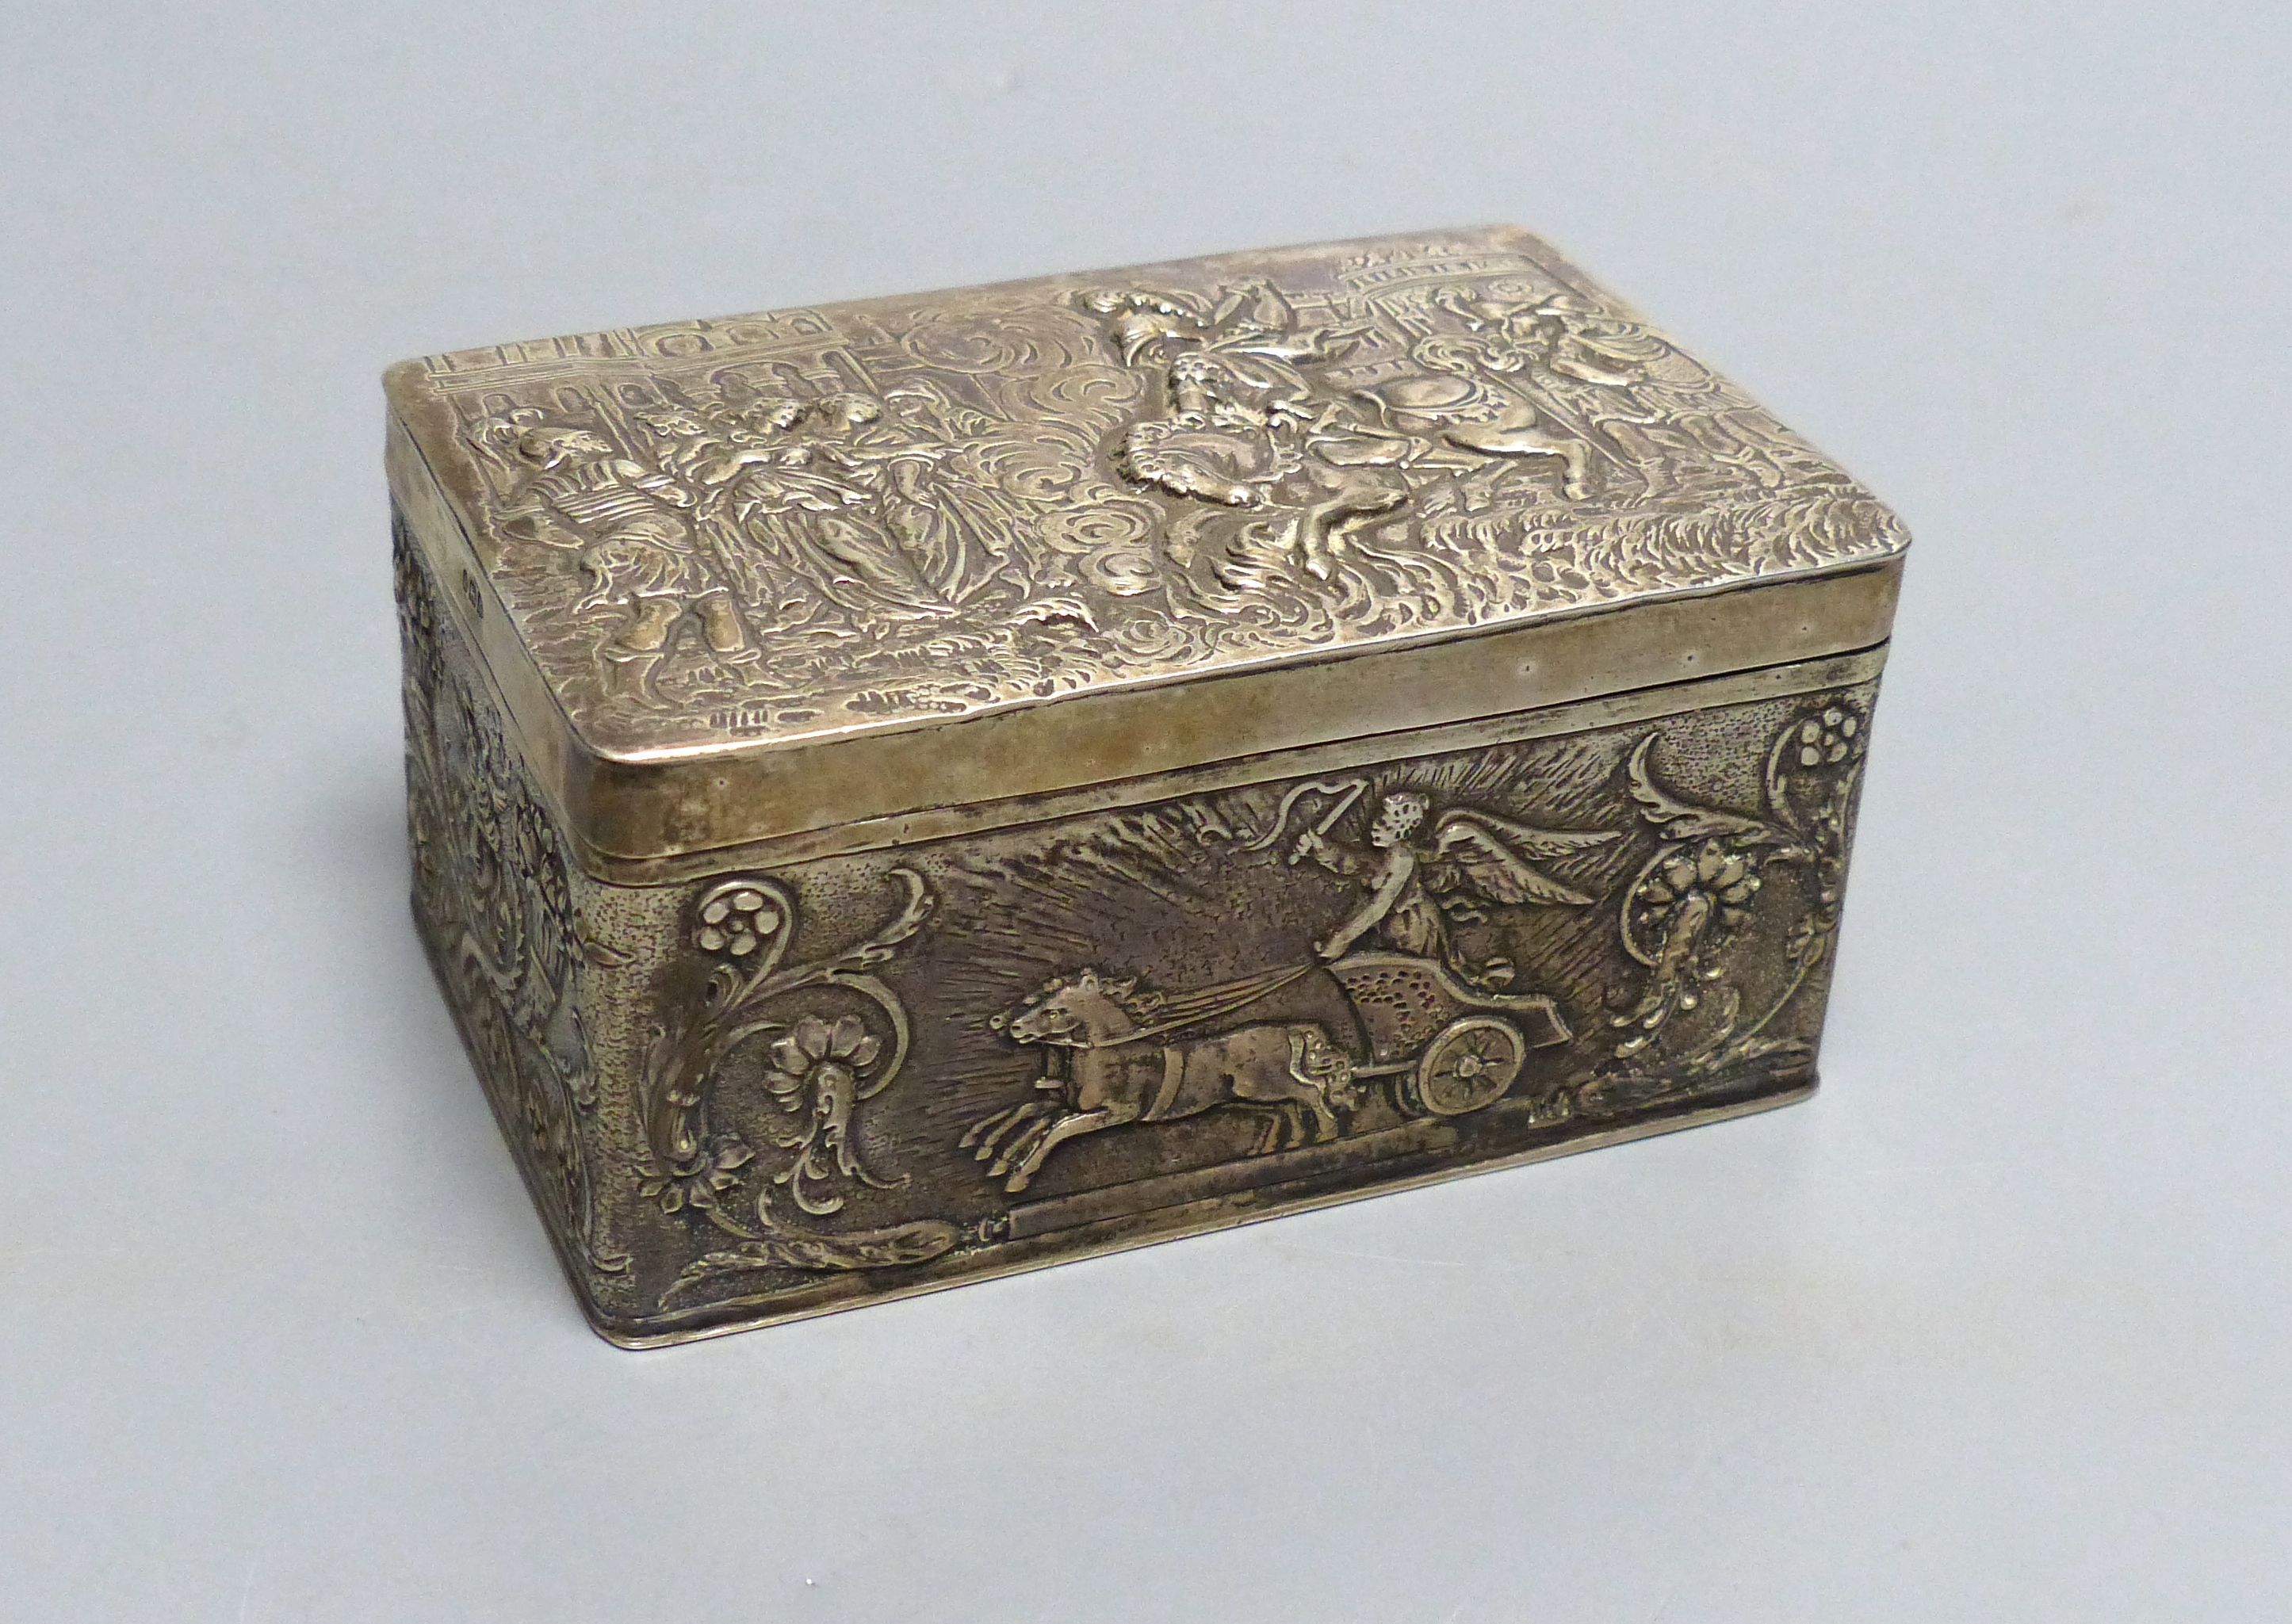 An early 20th century Hanau embossed silver rectangular box with hinged cover, import marks for London, 1902, width 10.7cm,